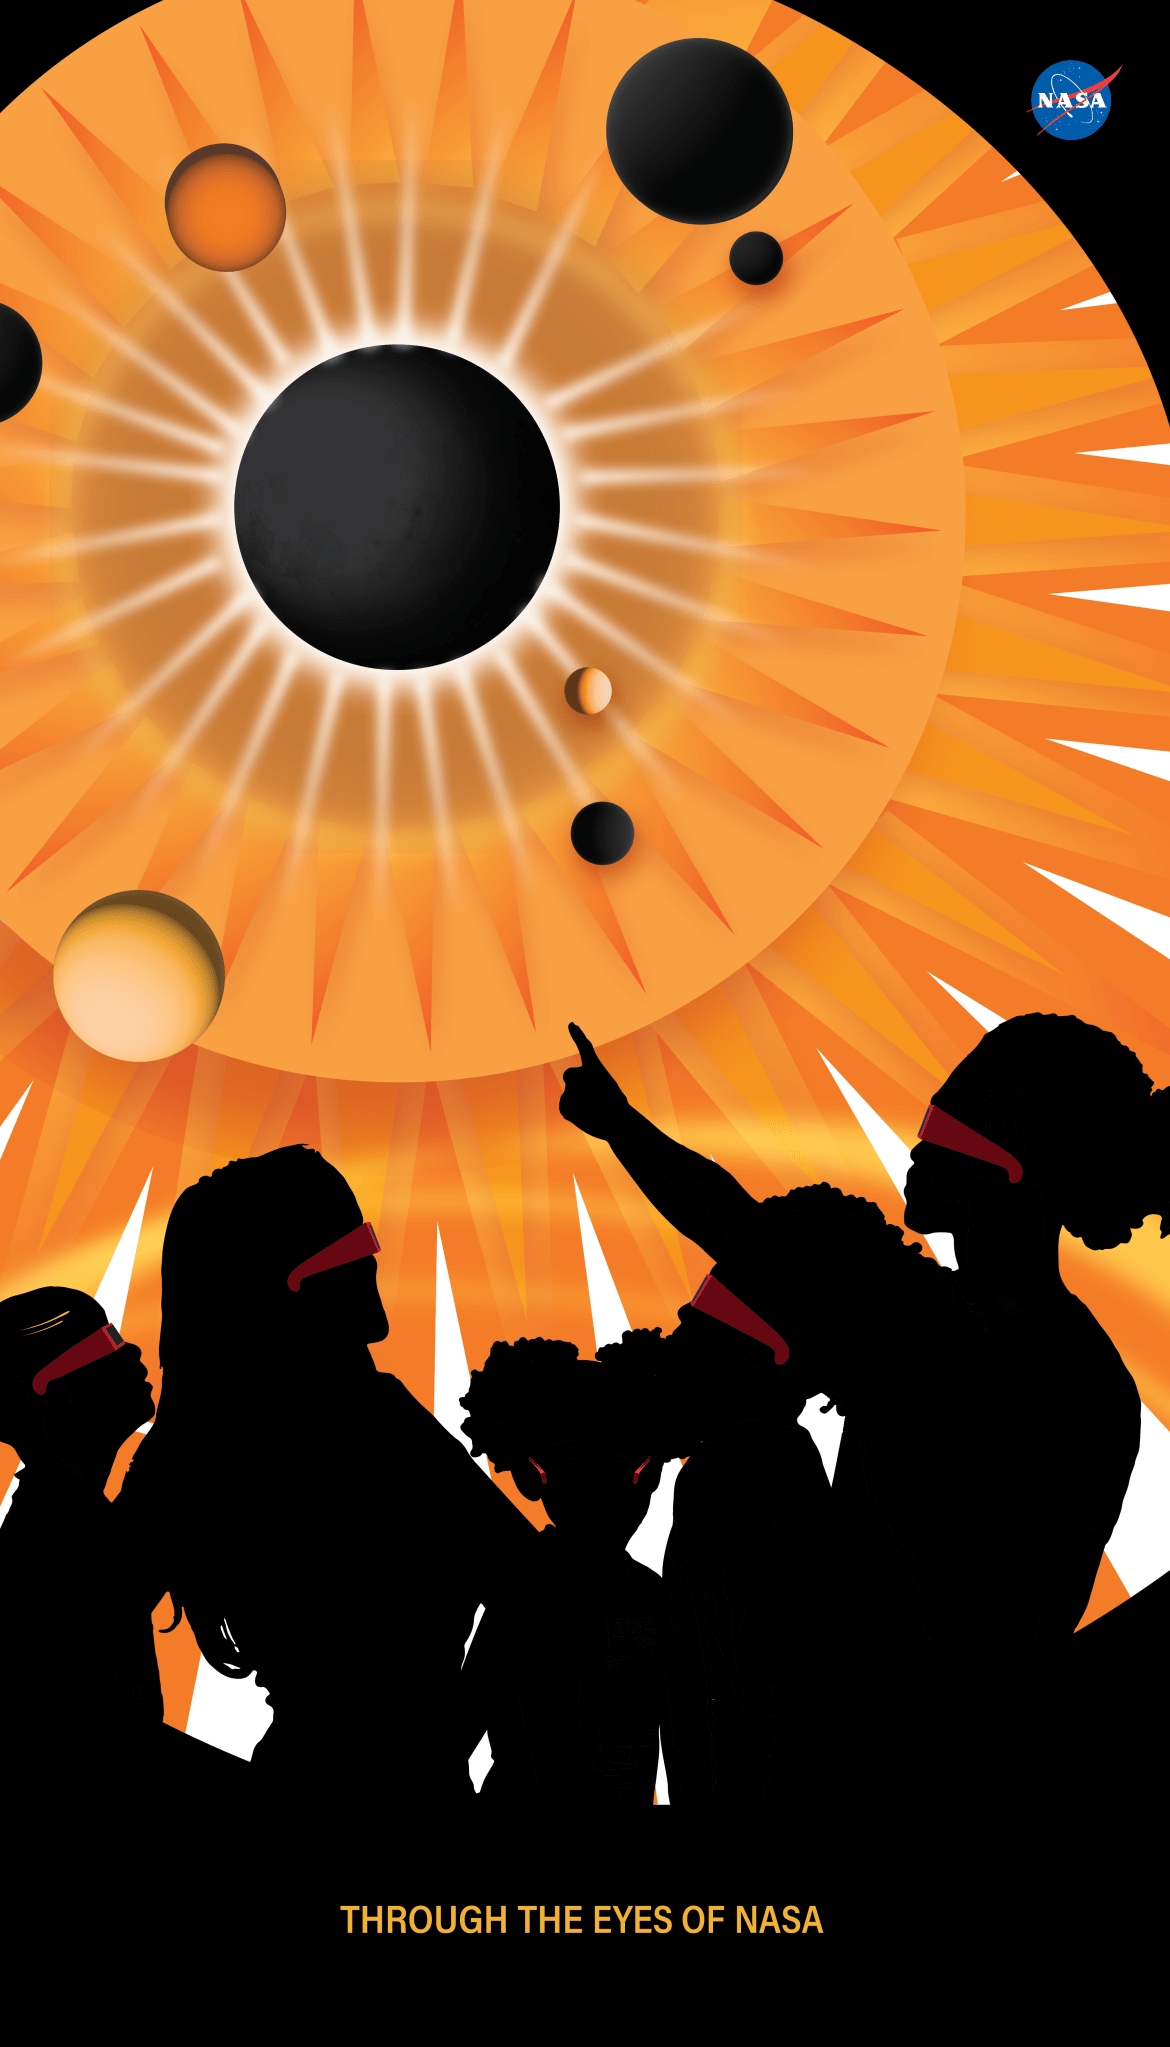 An illustrative poster shows the black silhouettes of five people of different heights wearing red eclipse glasses and looking at a total solar eclipse. One person points toward the eclipse. The eclipse is represented as a black disk surrounded by concentric circles of yellow and orange with white, orange, and red rays. Several spheres appear around the eclipse. At the bottom are the words “Through the eyes of NASA” and the NASA logo appears in the upper right.